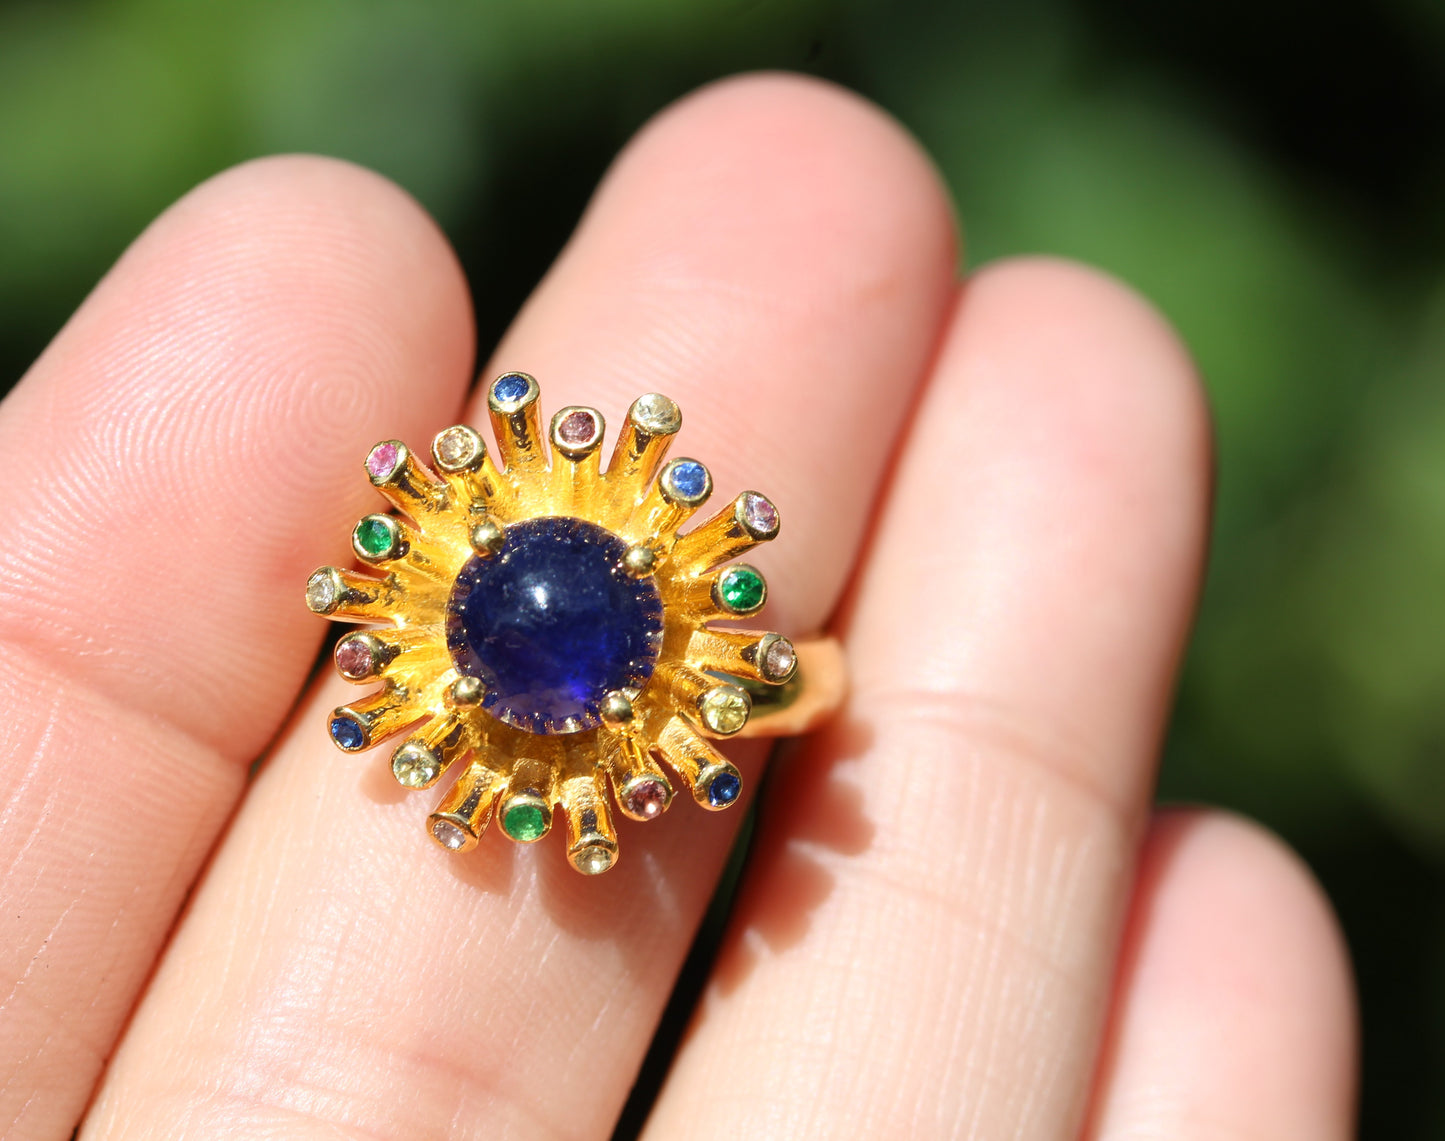 Blue Sapphire Starburst Ring - 24k Gold Plated Silver - Adjustable Size  #305